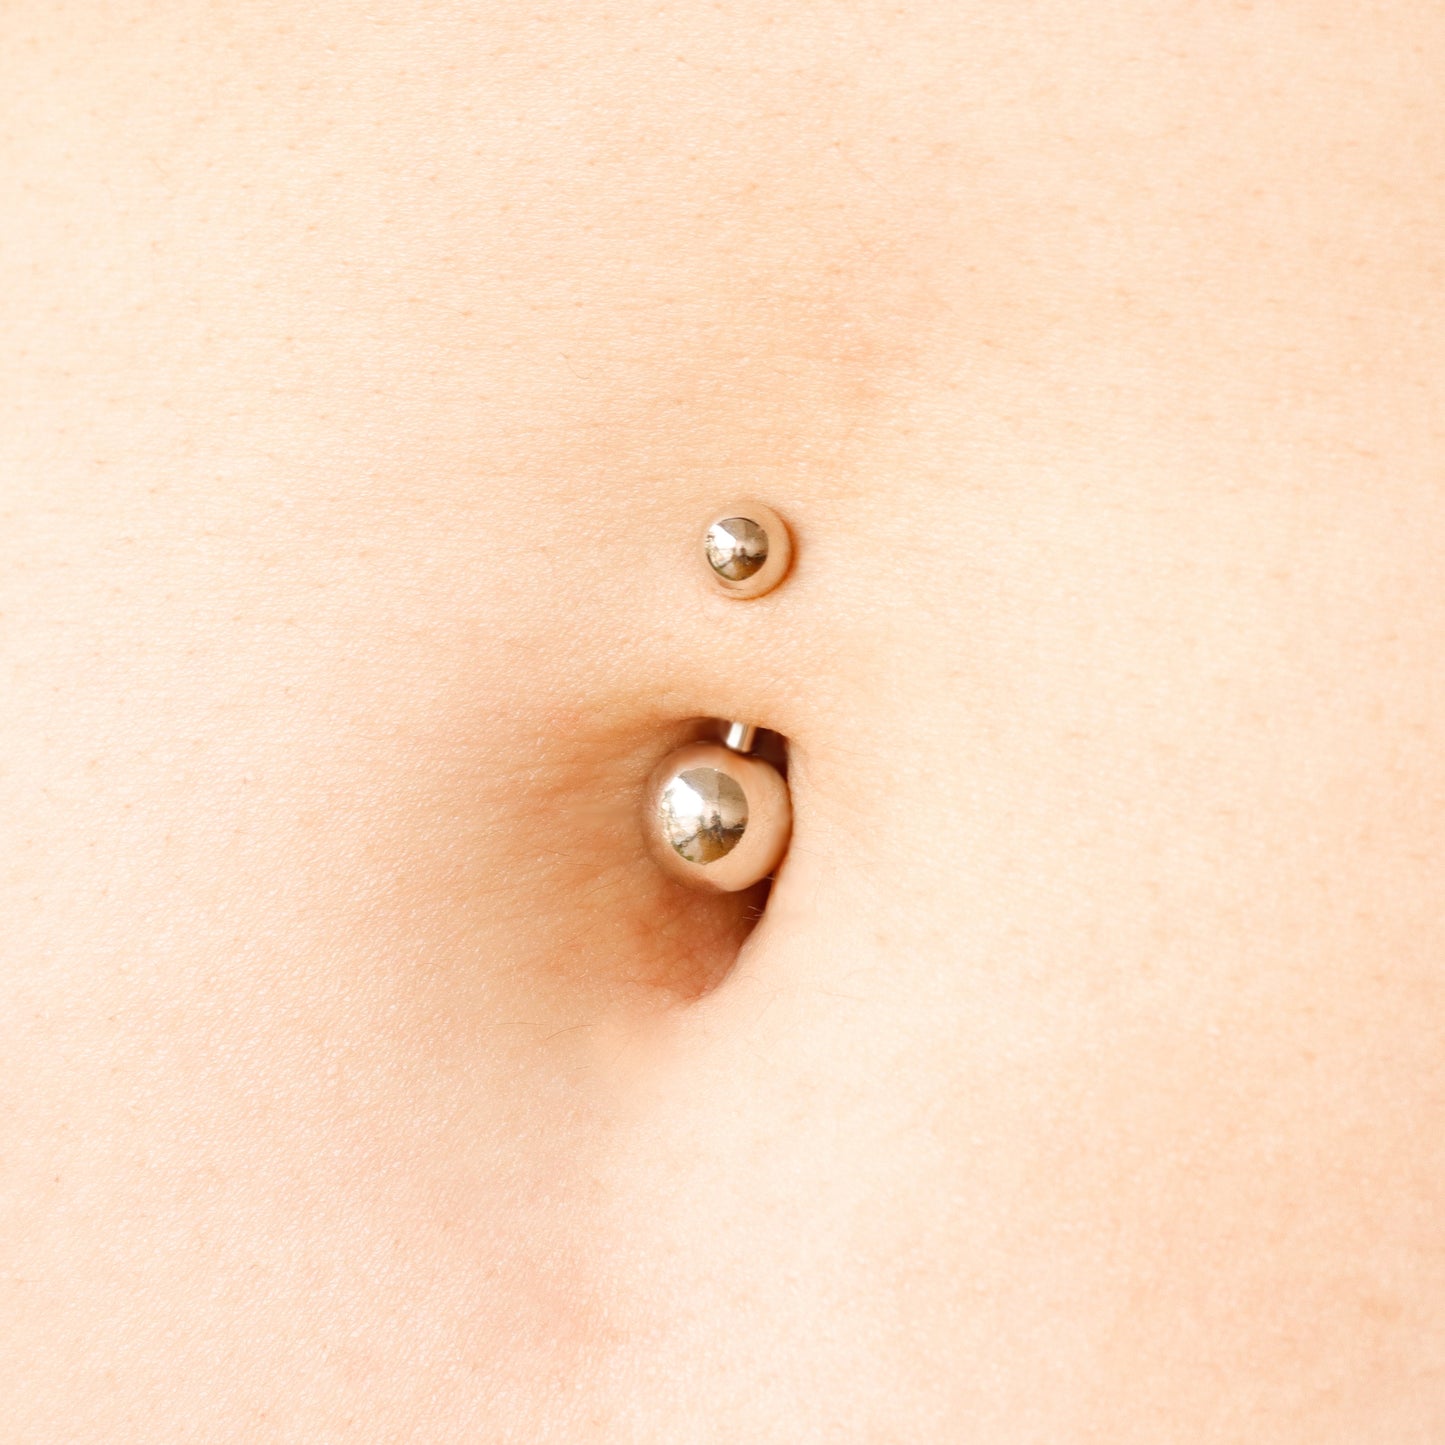 Solid 925 Silver | 16G/14G Classic Ball Combination Belly Ring | 6mm 1/4" 8mm 5/16" 10mm 3/8" - Sturdy South